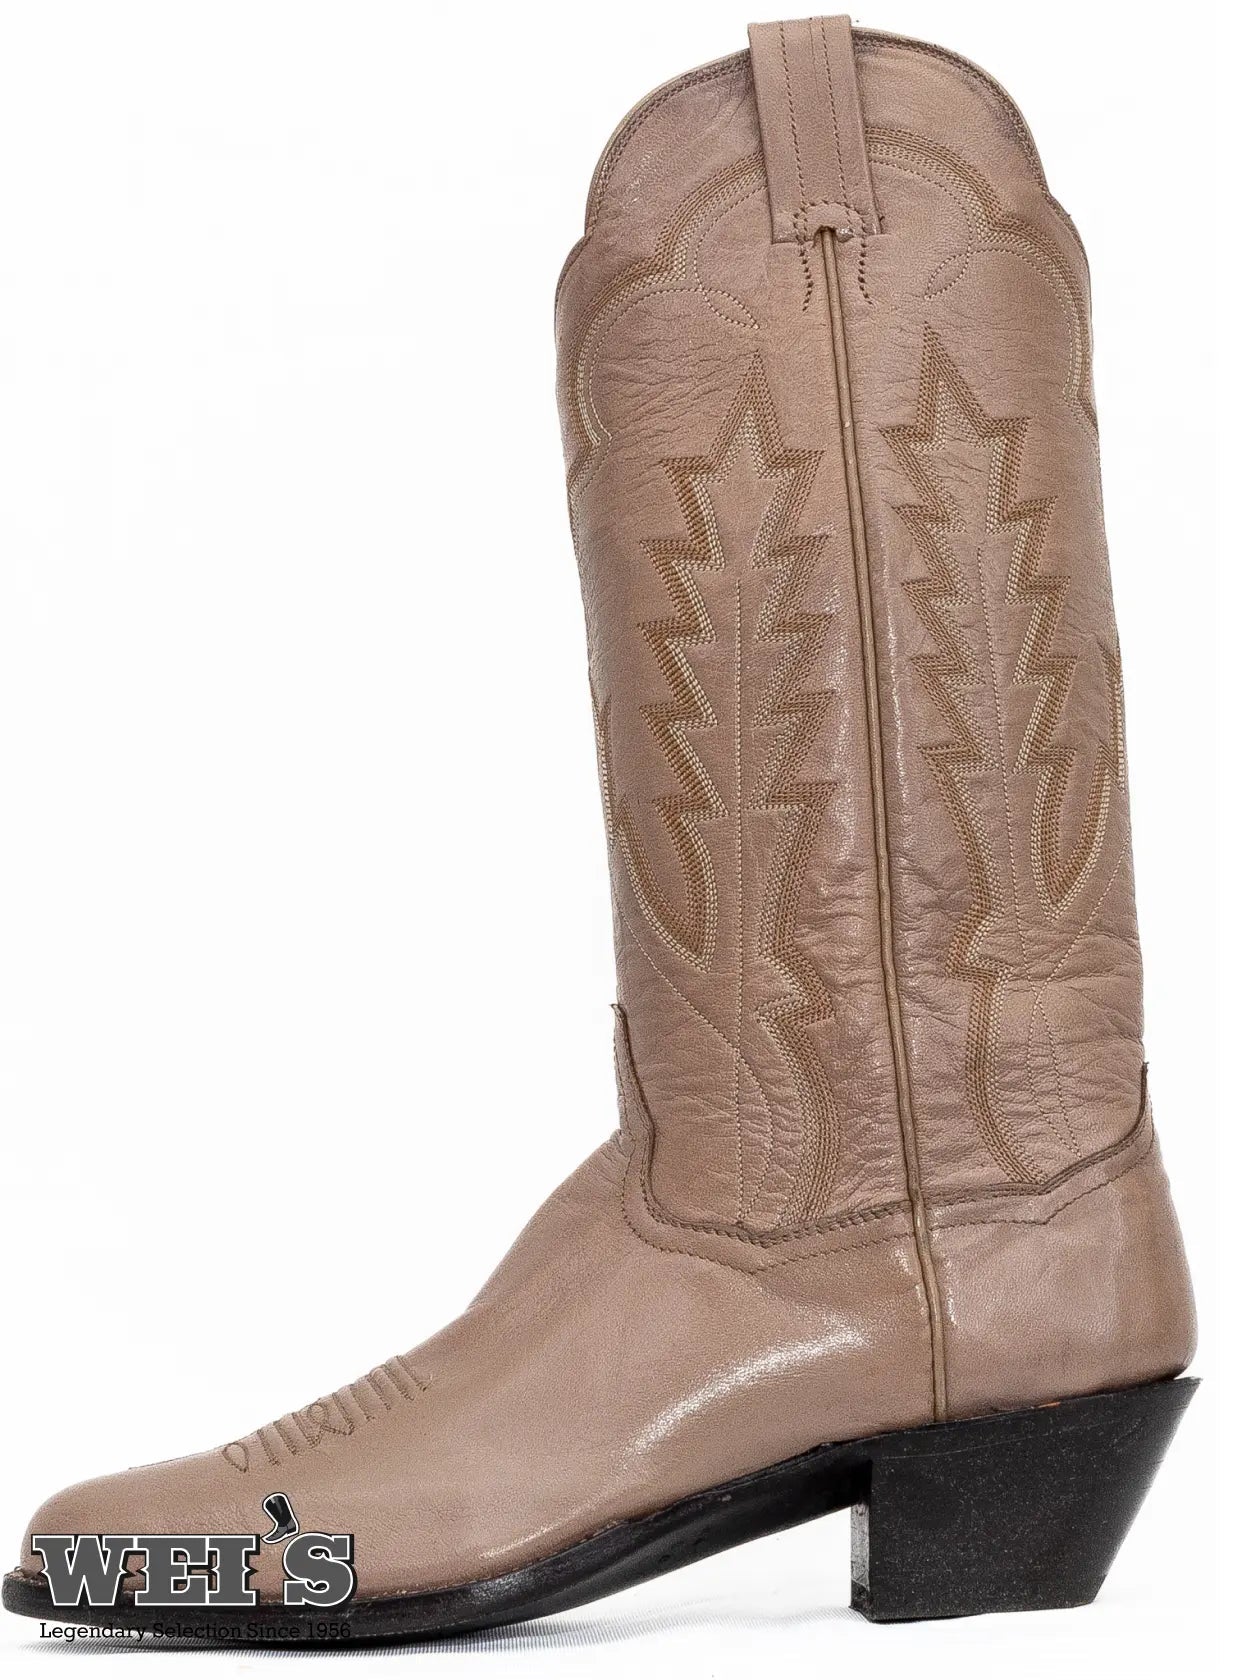 Panhandle Slim Women's Cowgirl Boots 13" Cowhide R-Toe W5551L